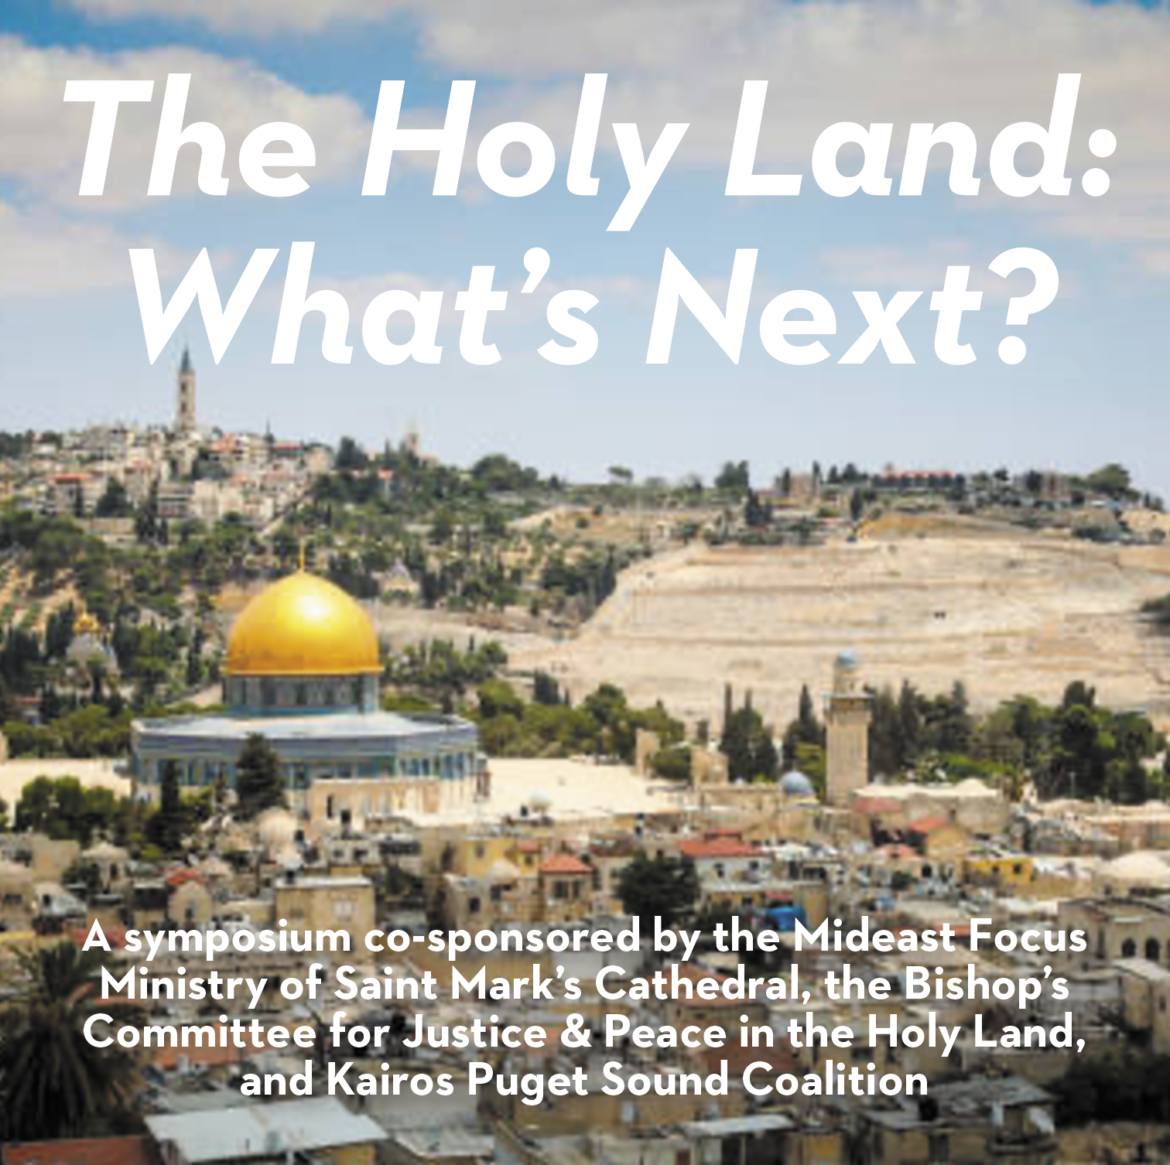 The Holy Land: What’s Next?